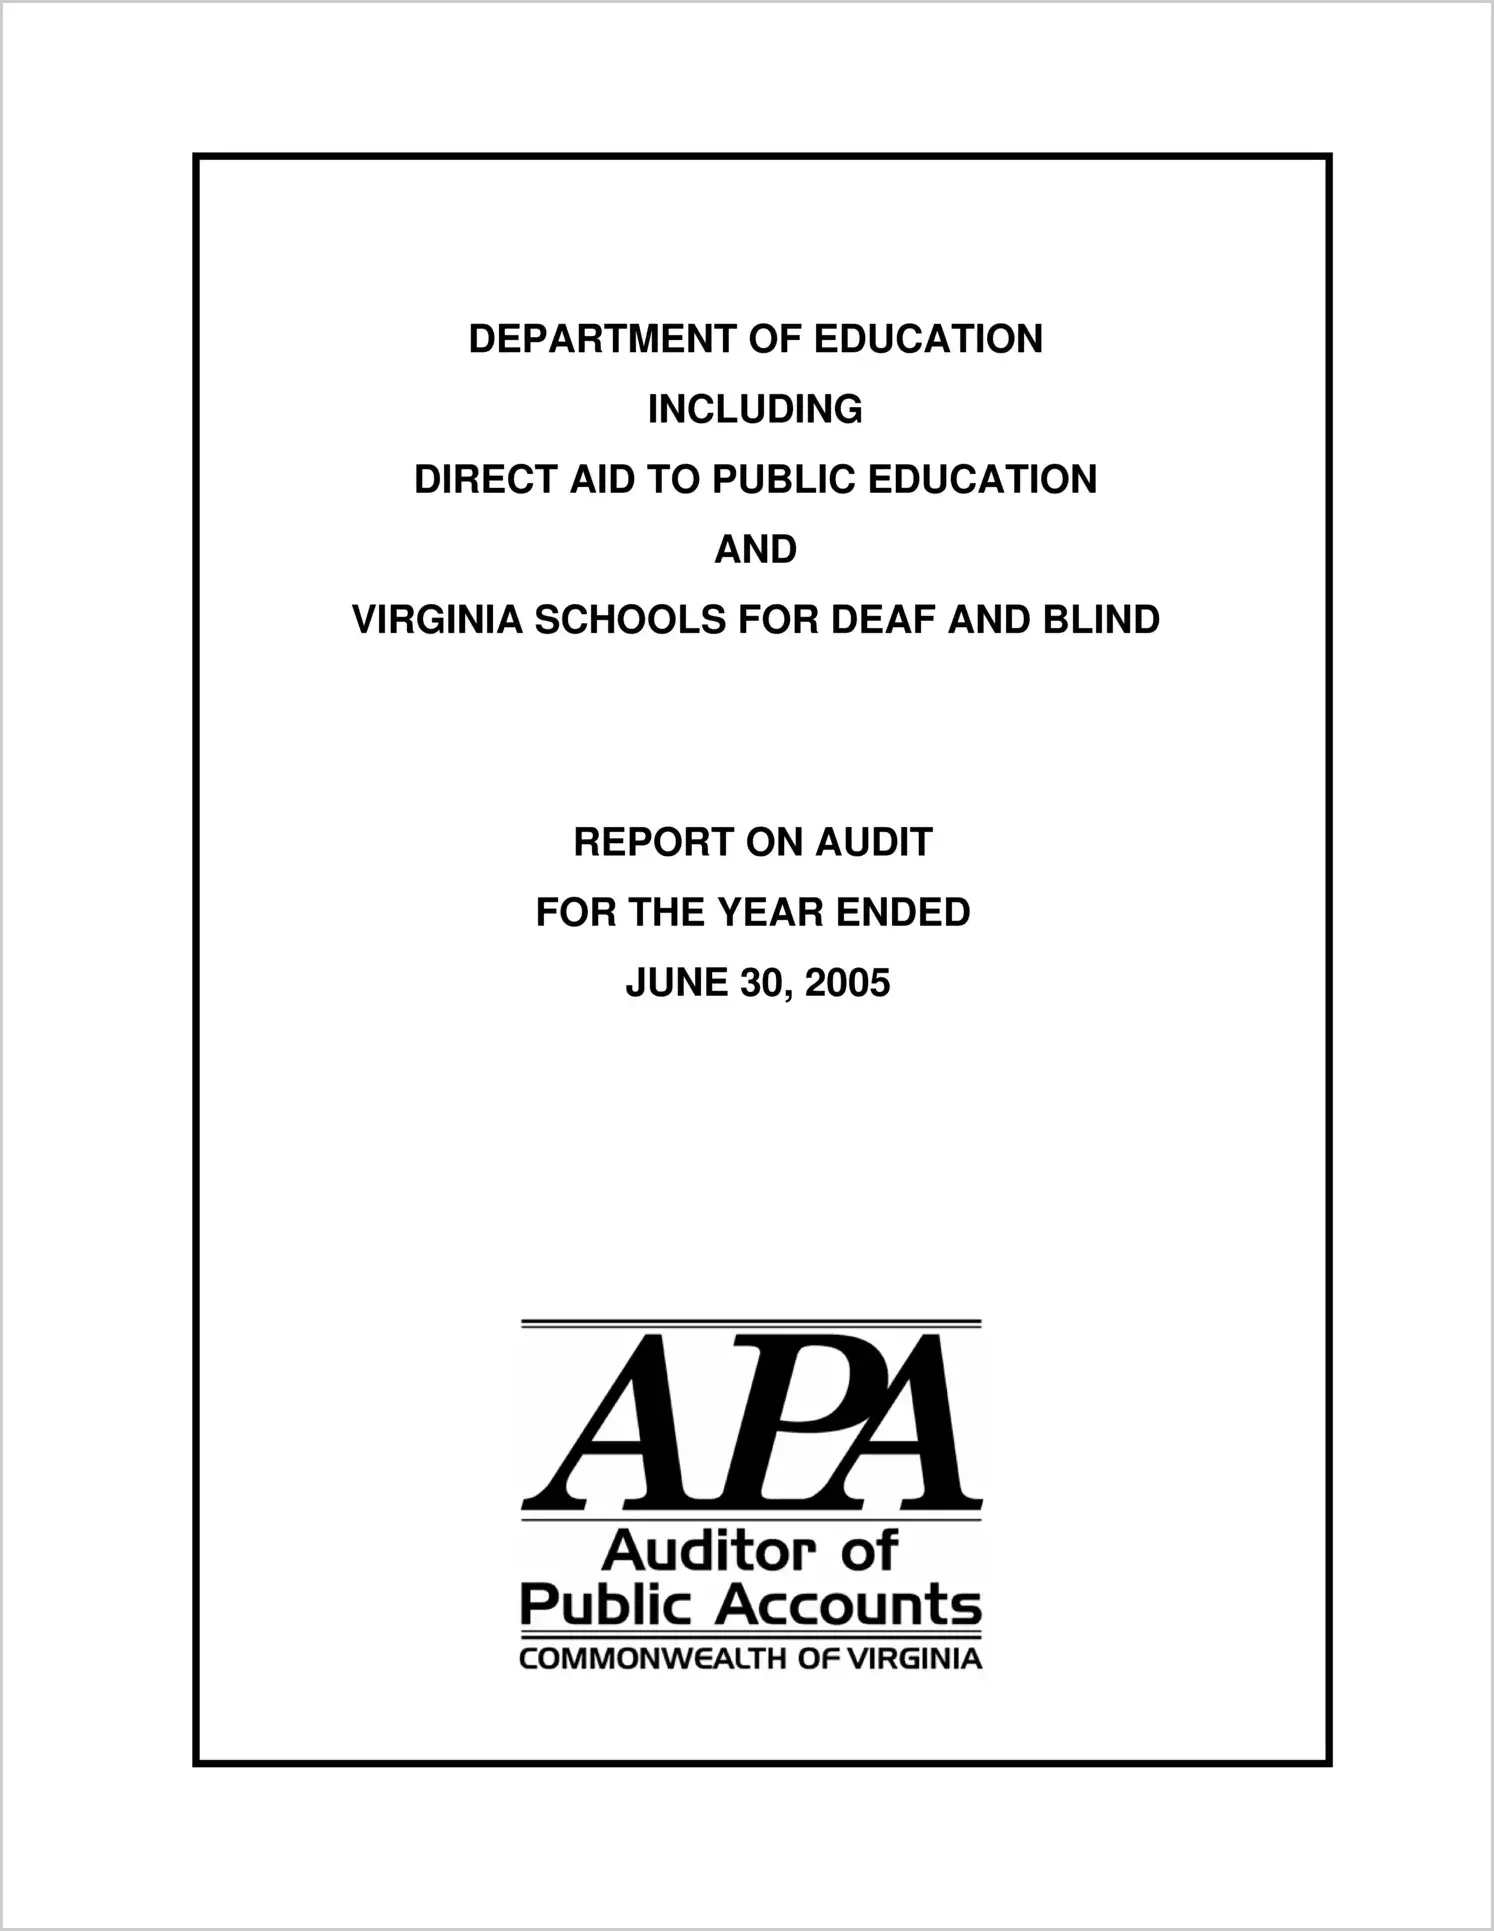 Department of Education Including Direct Aid to Public Education, the Virginia Schools for the Deaf and Blind, and the Virginia Schools for the Deaf and Blind Foundation for the year ended June 30, 2005